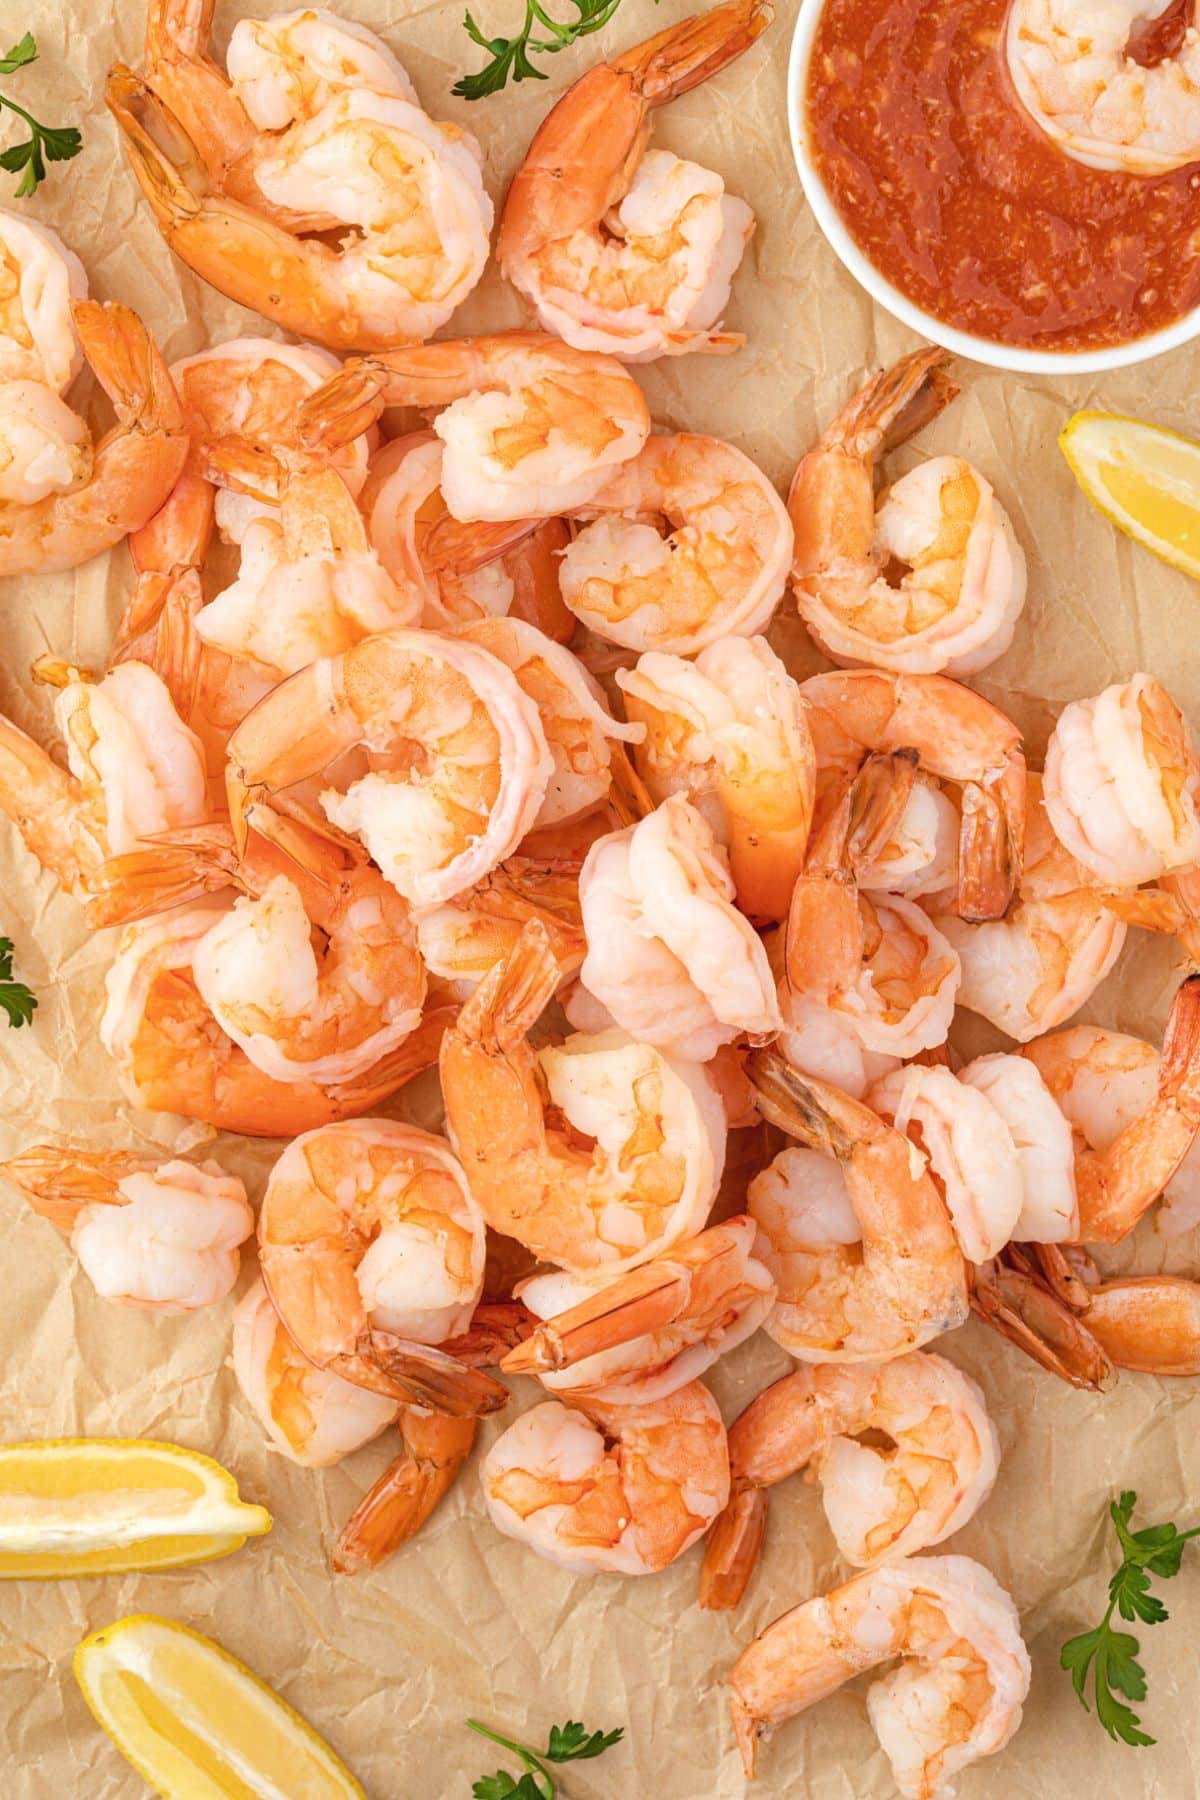 A pile of blanched shrimp on brown parchment with a bowl of cocktail sauce and some lemon wedges.